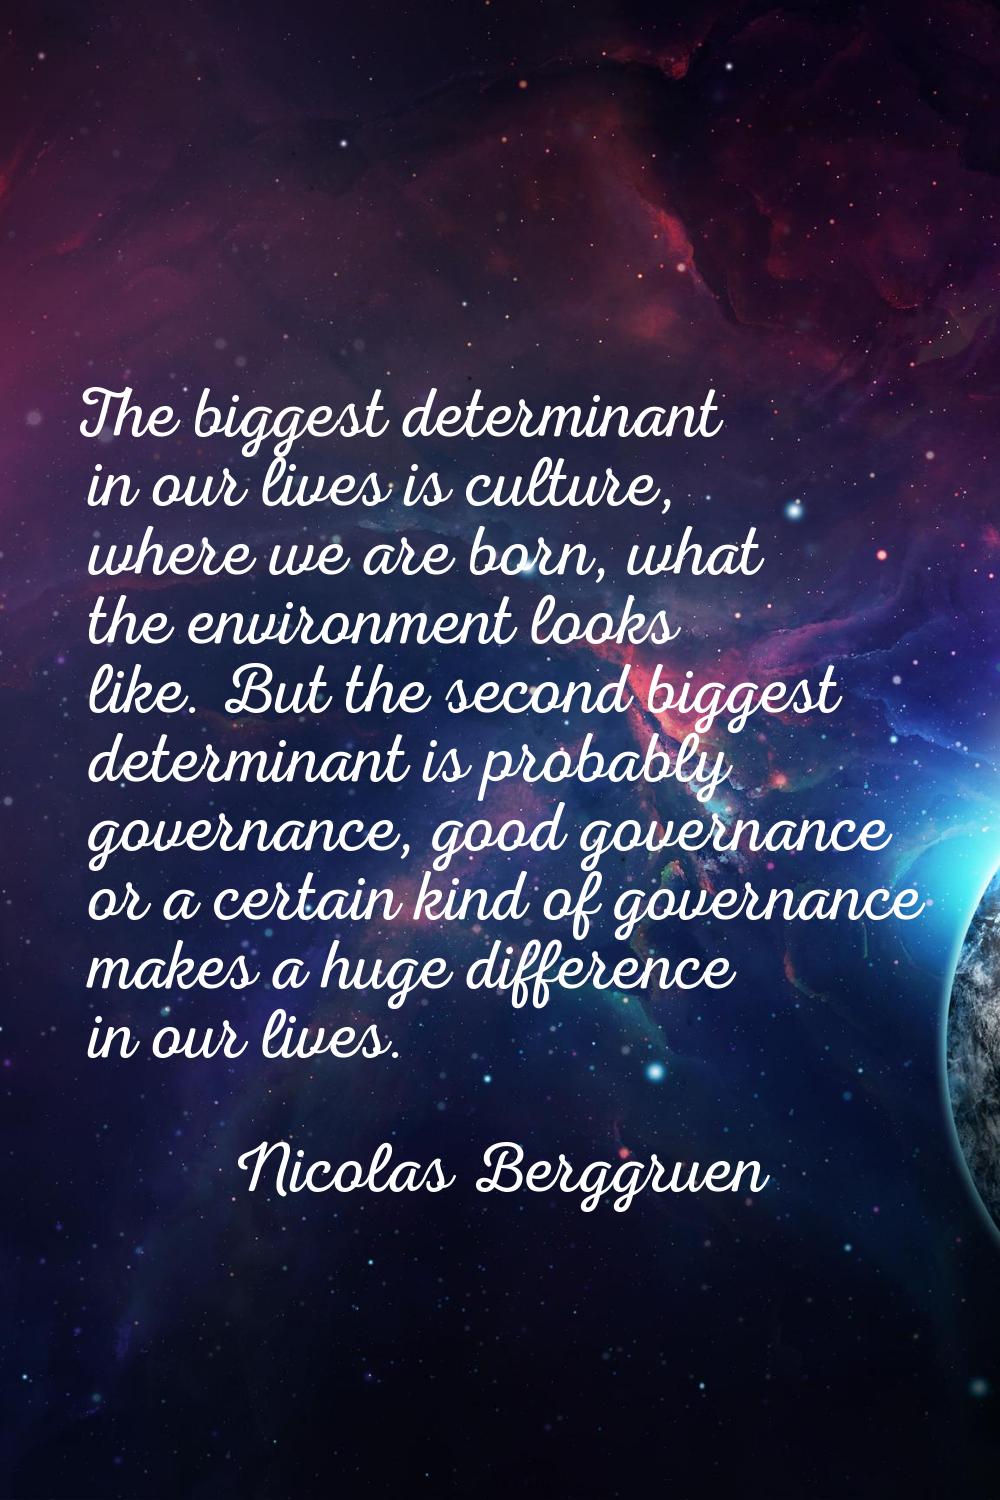 The biggest determinant in our lives is culture, where we are born, what the environment looks like